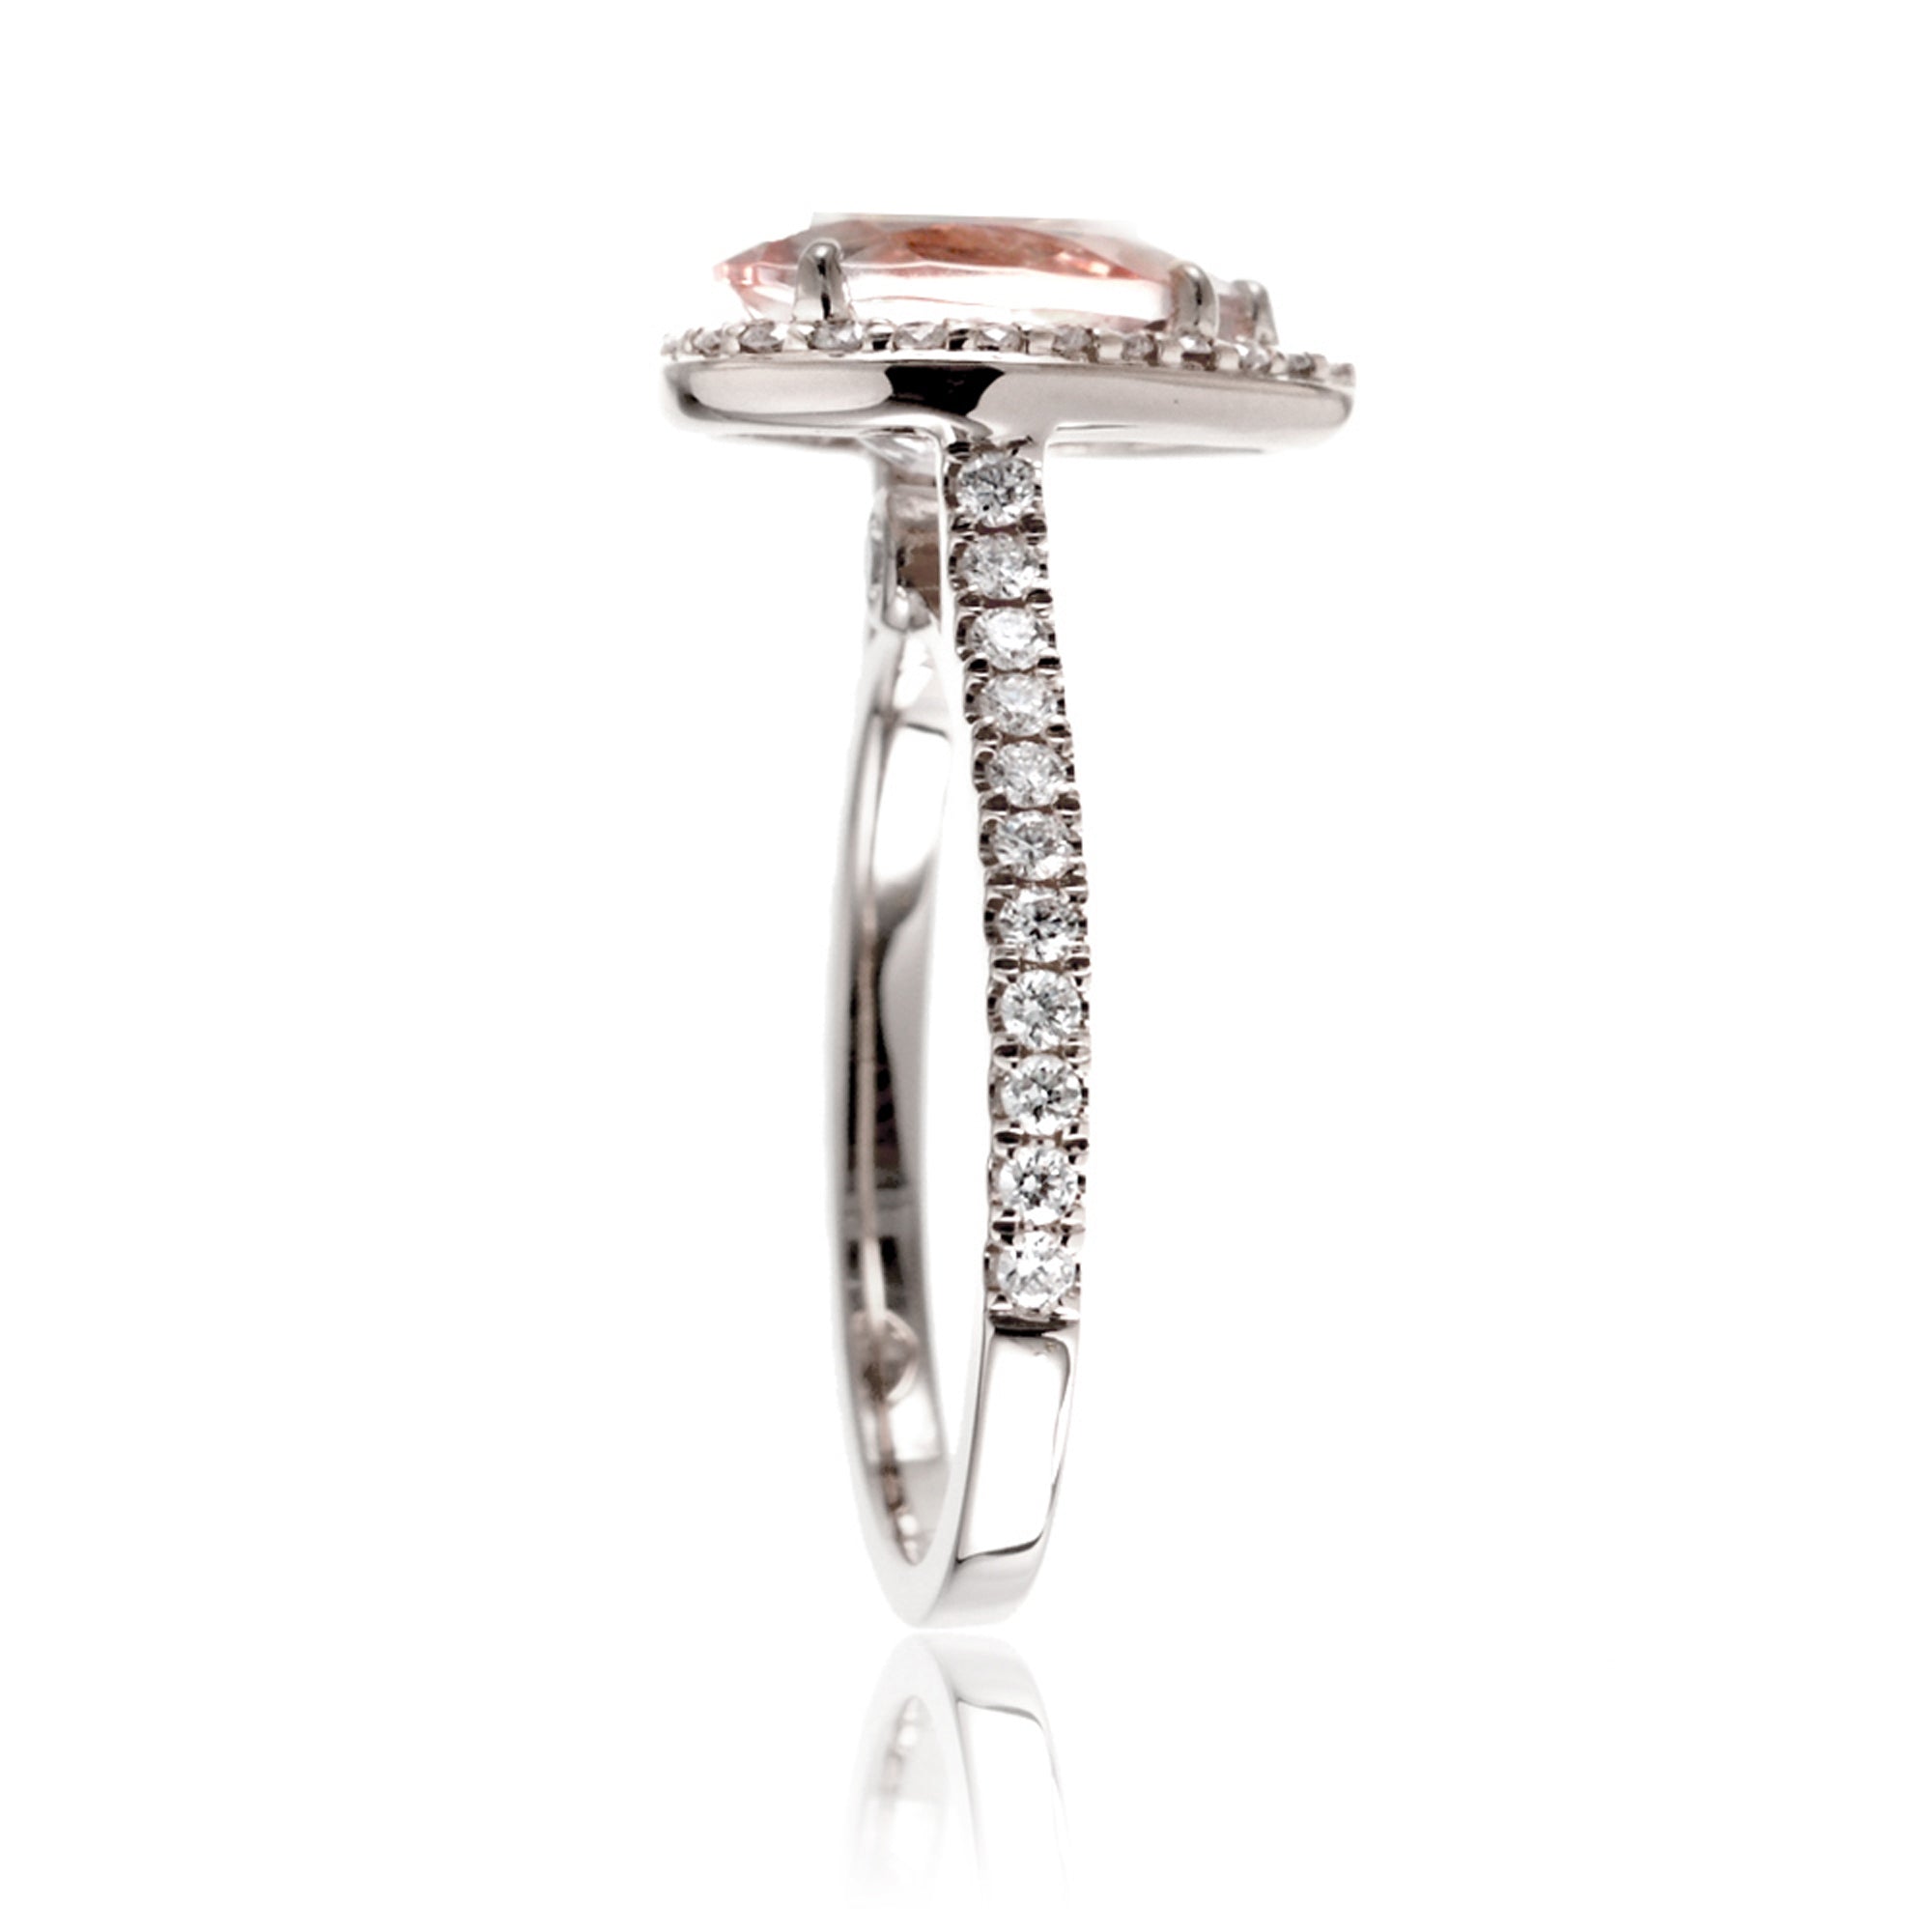 Pear cut morganite ring with diamond halo and band in the Sunset white gold